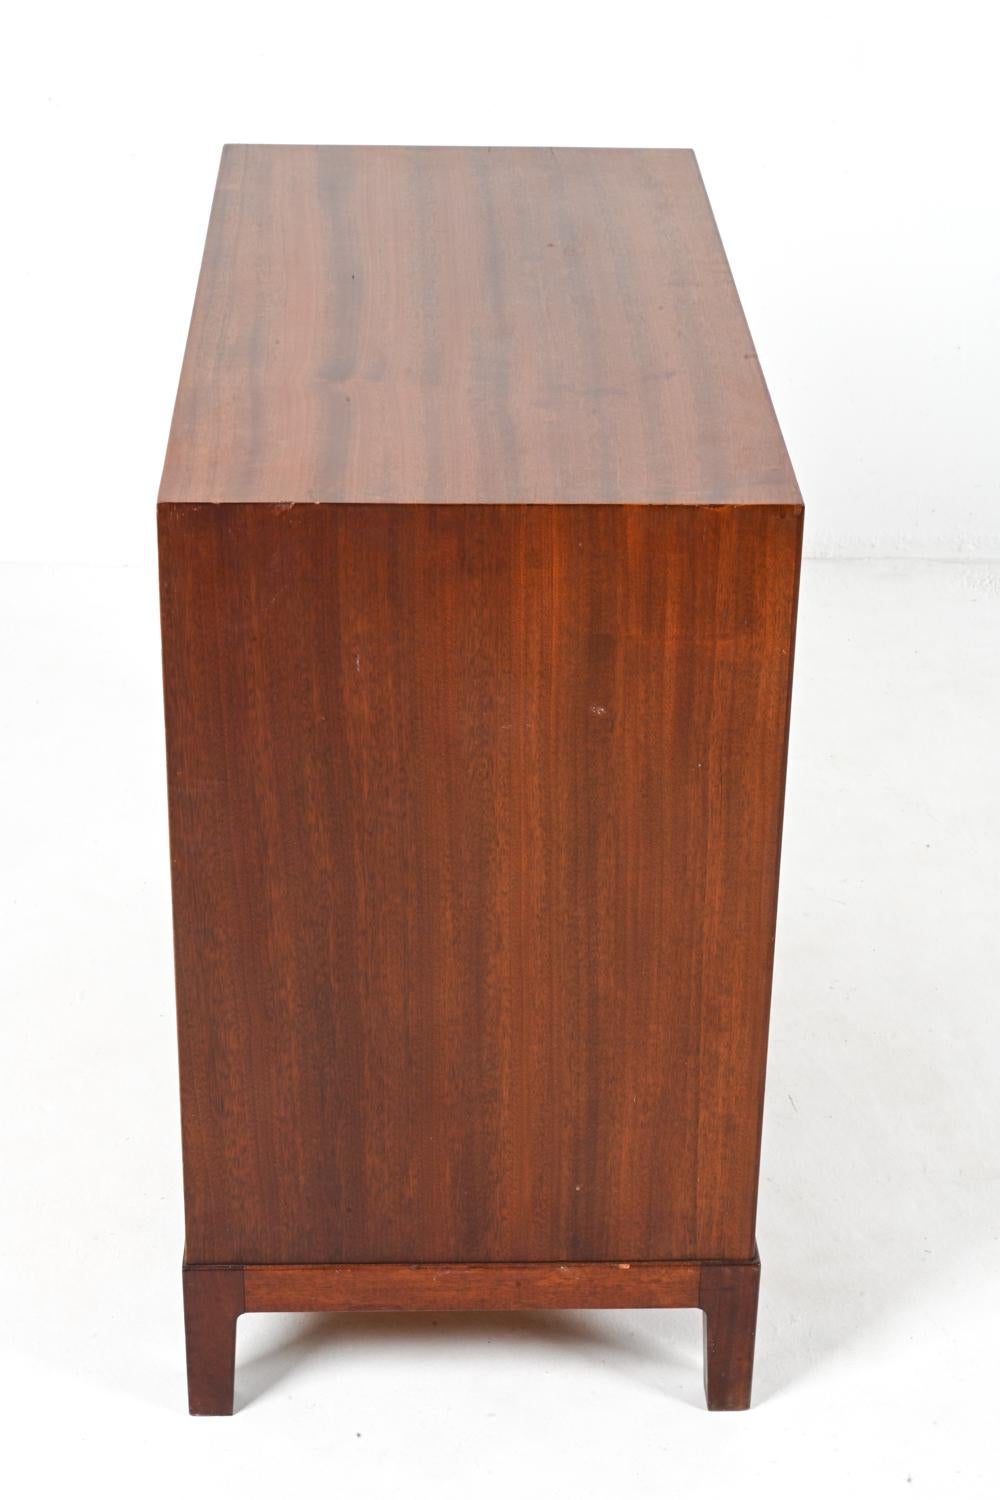 Rare Mahogany Three-Drawer Chest by Ole Wanscher for A. J. Iversen, c. 1940's For Sale 11